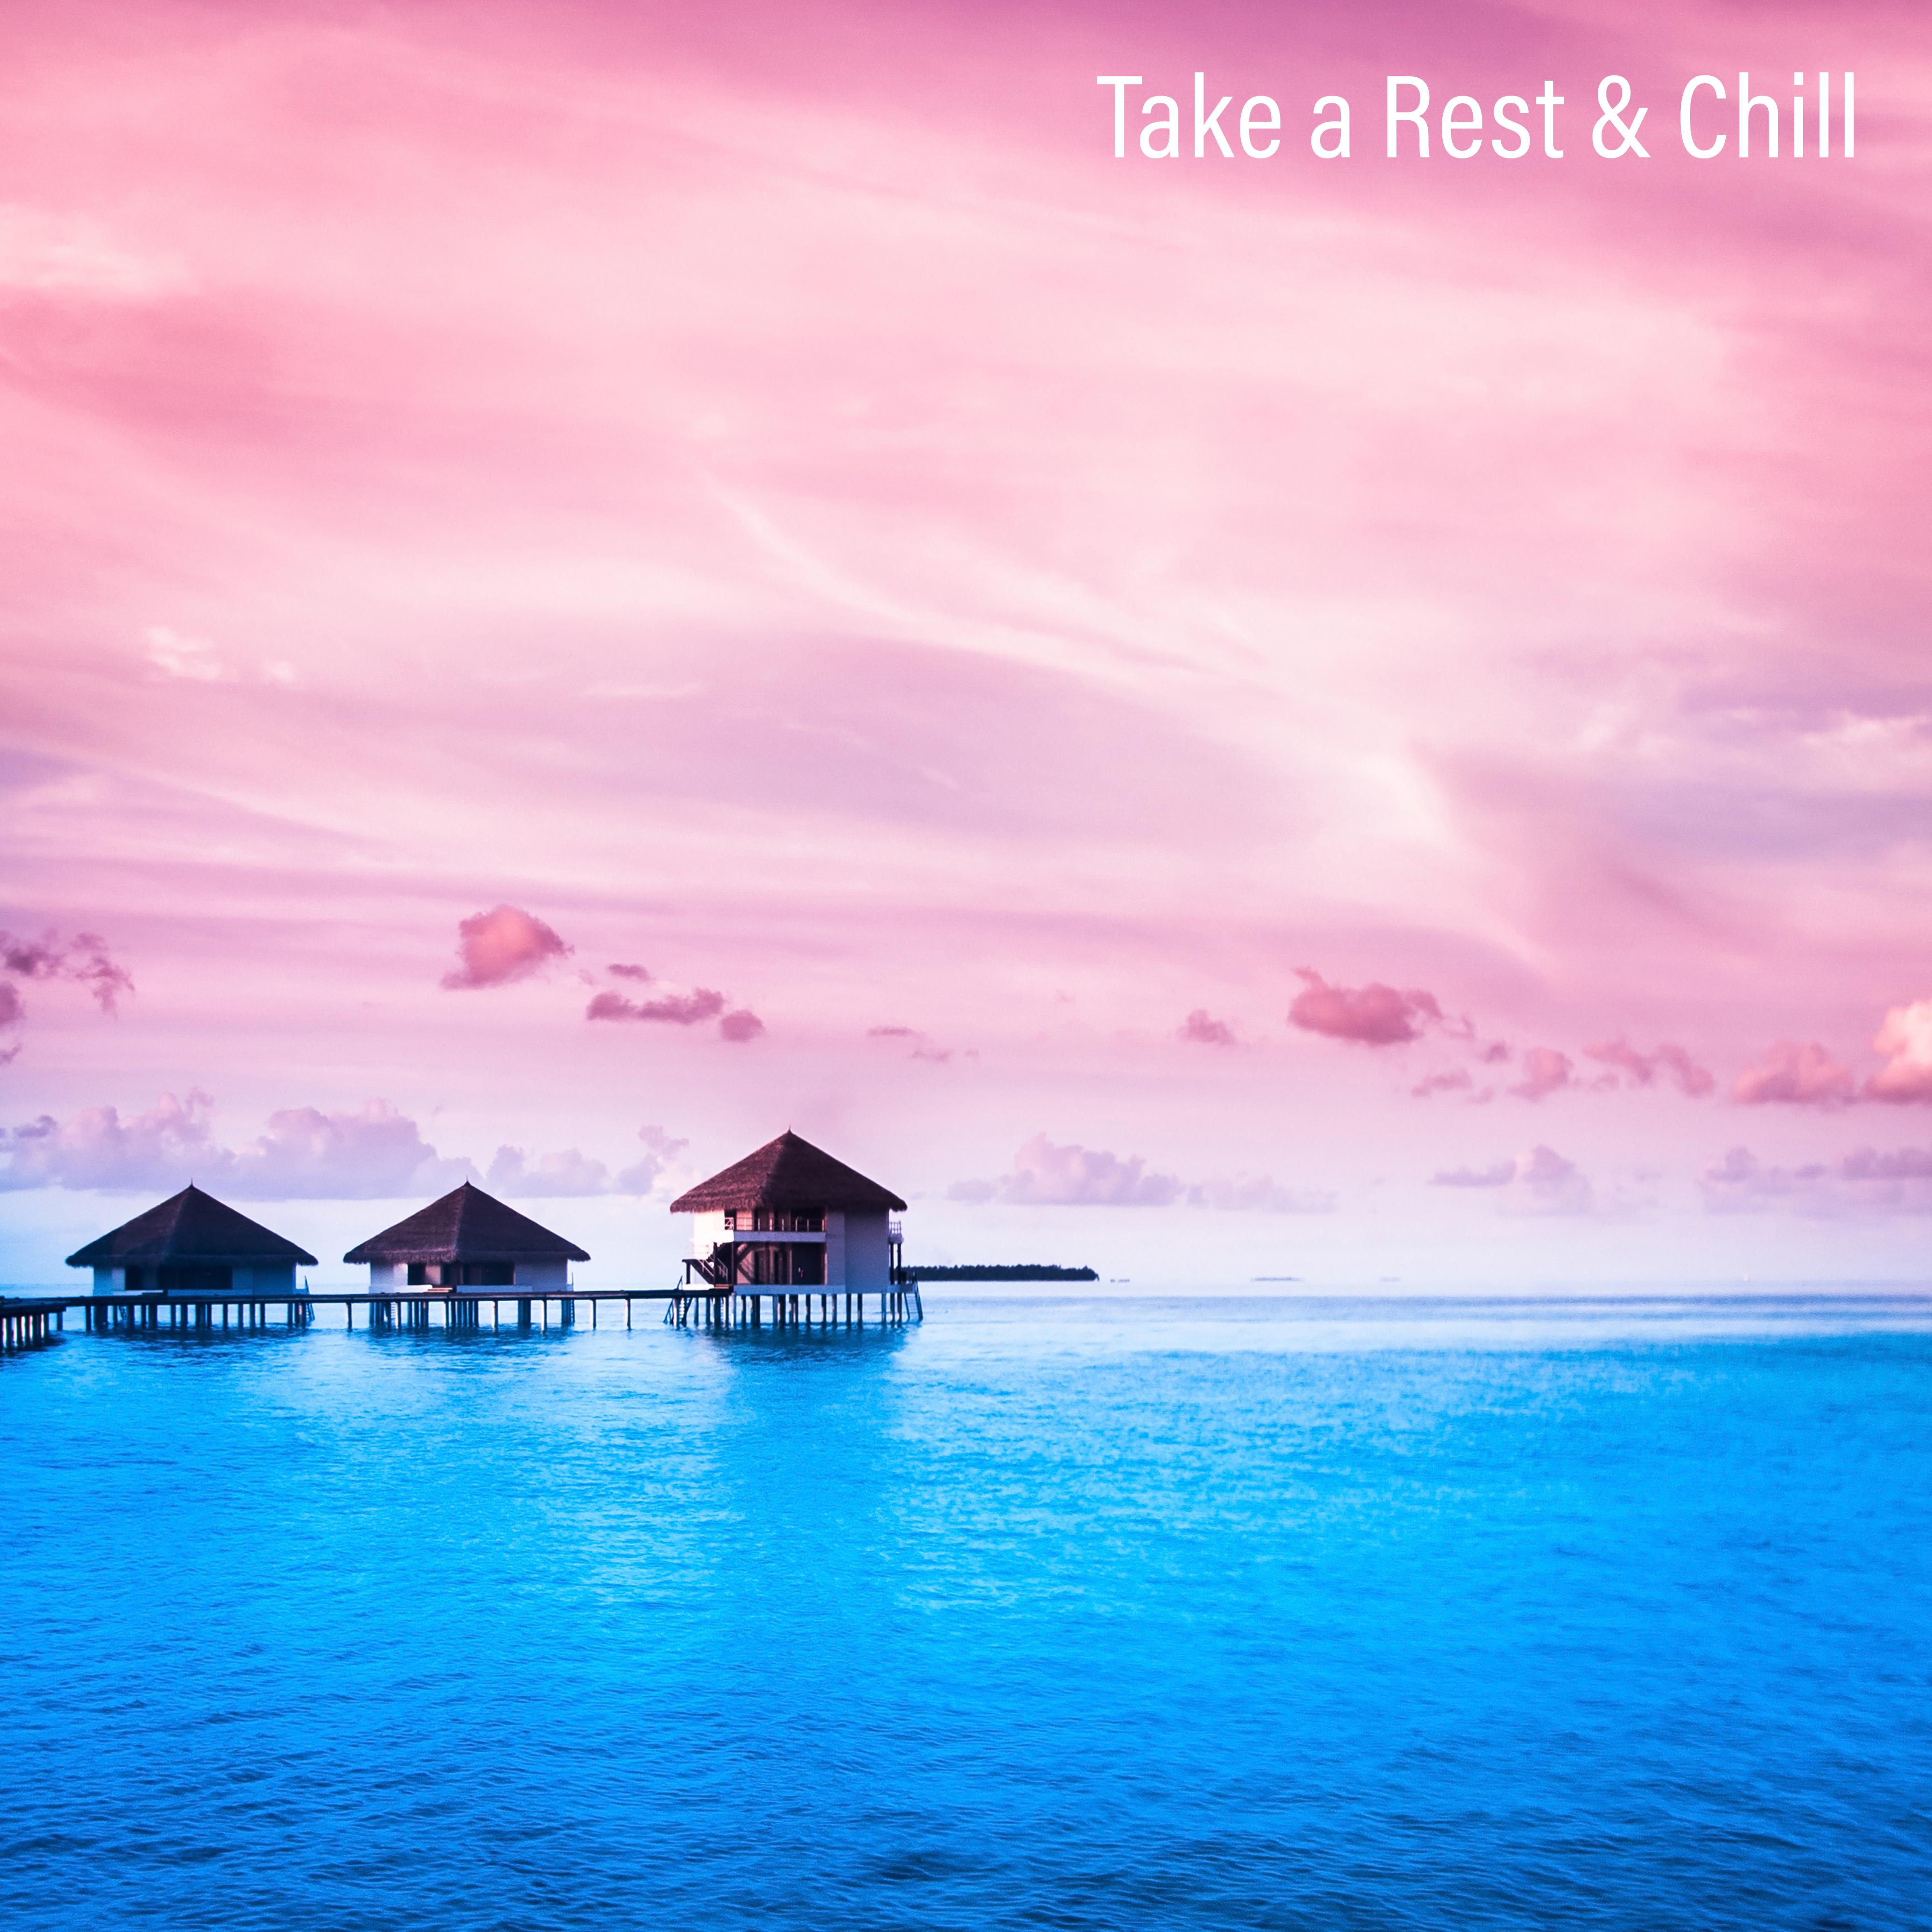 Take a Rest & Chill: Selection of Best 2019 Chillout Relaxation Music, Holiday Lounge, Ambient Melodies & Deep Beats